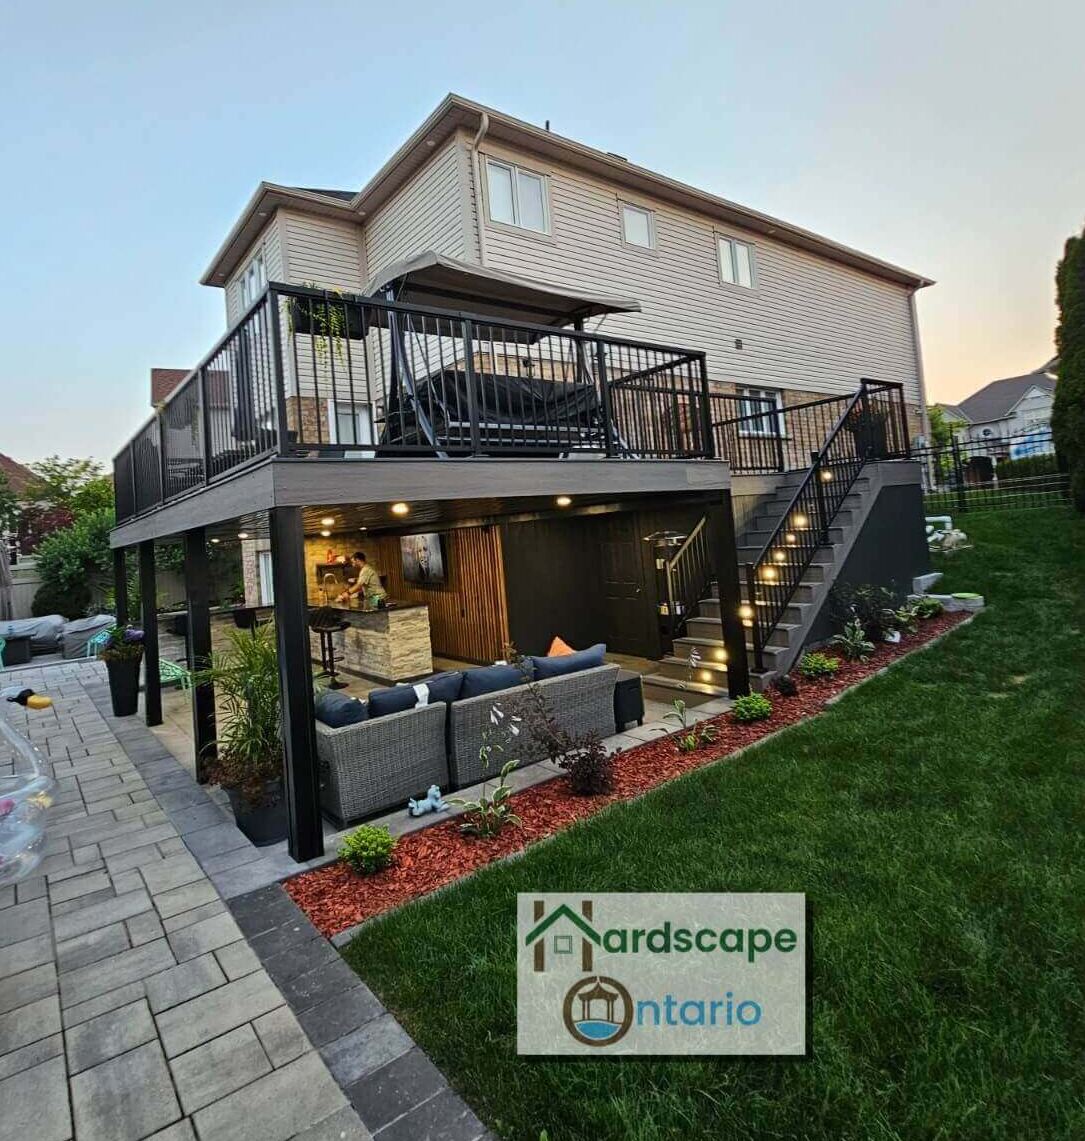 Perfectly designed huge multi-level deck with stairs to go upper level and interlock patio with an amazing seatings and outdoor kitchen